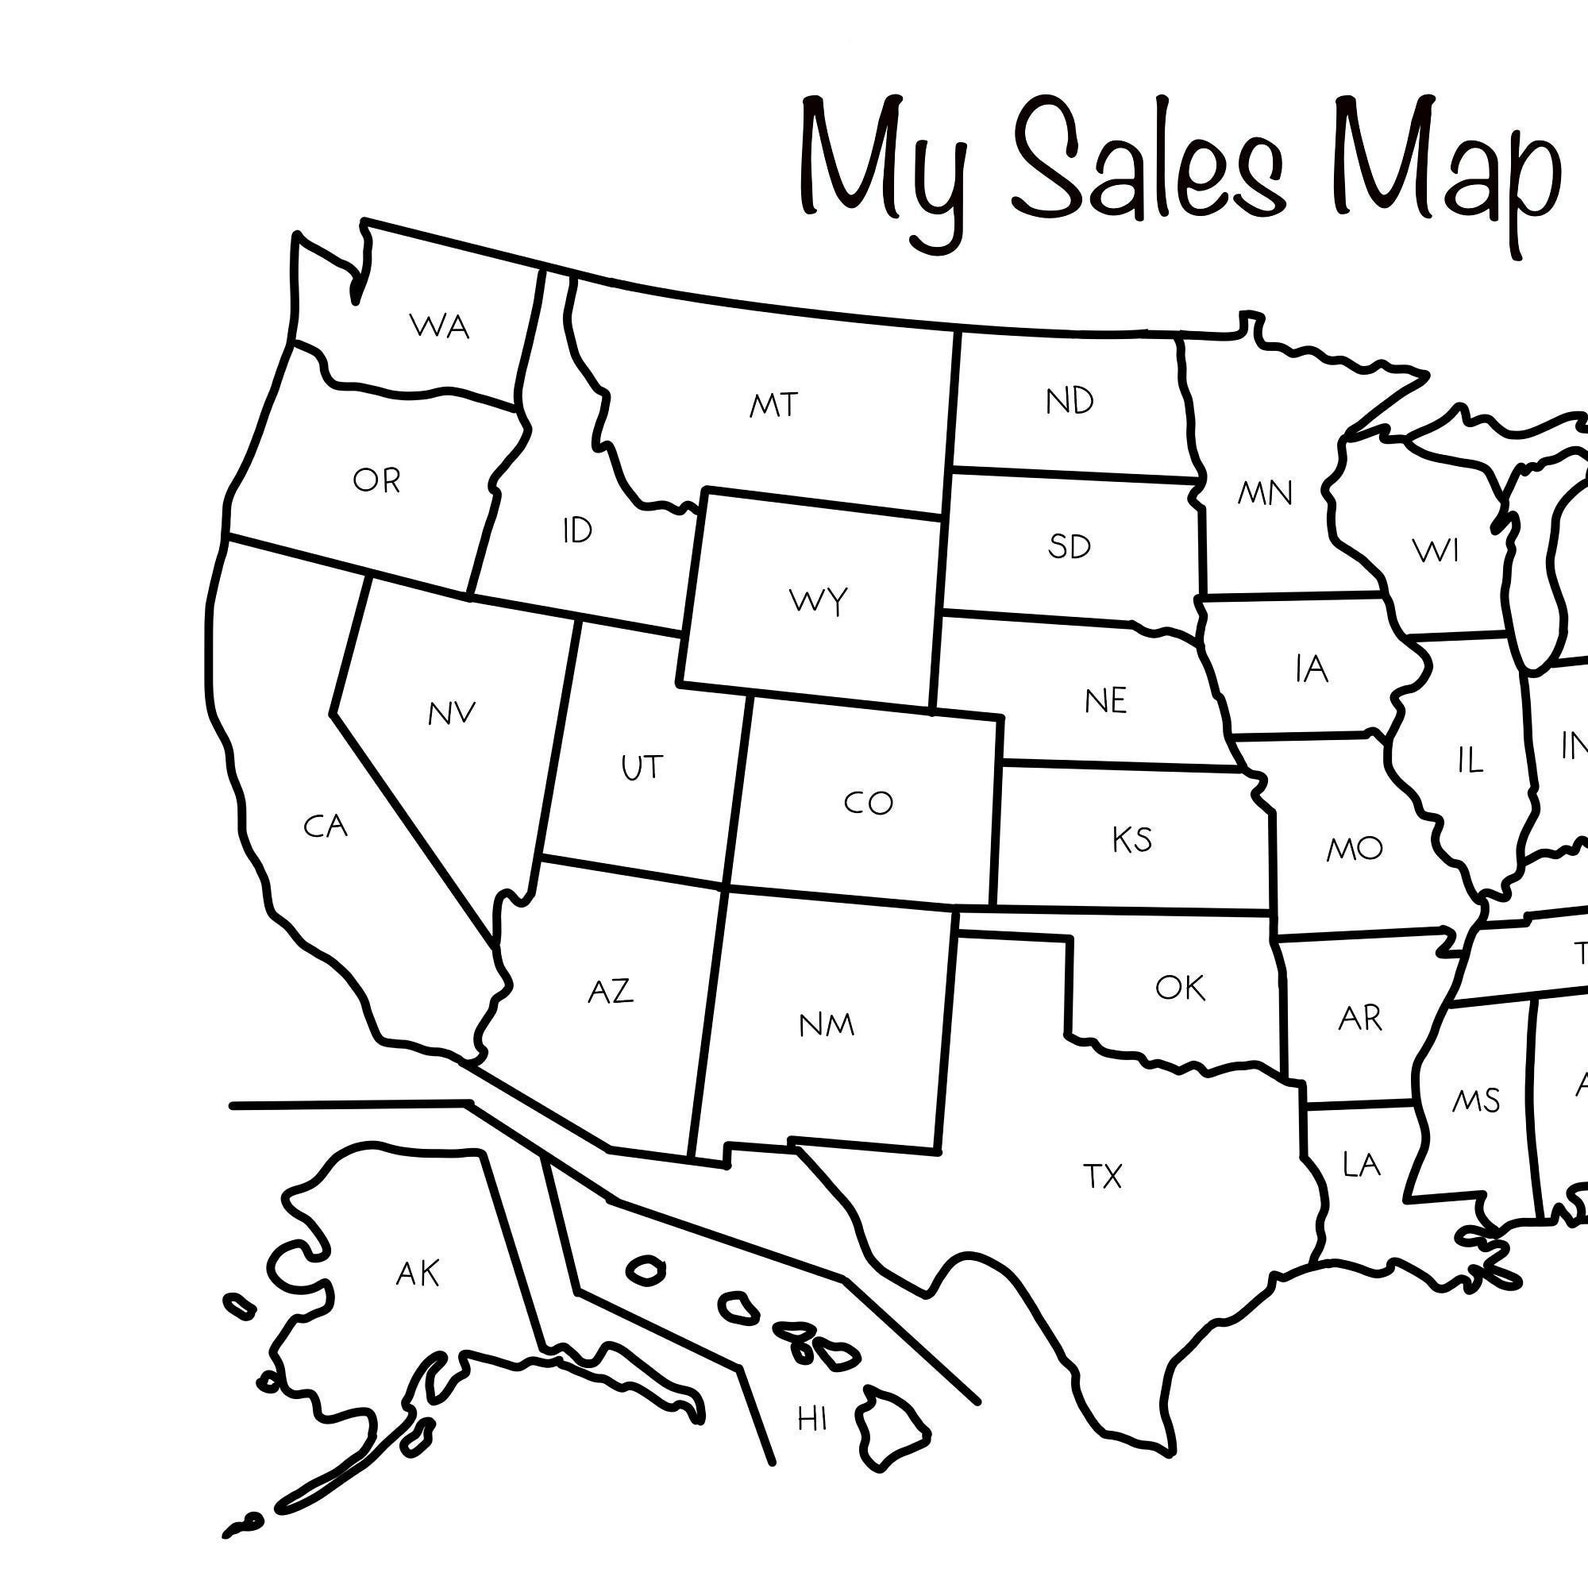 us-sales-map-etsy-sales-tracker-map-my-sales-map-download-etsy